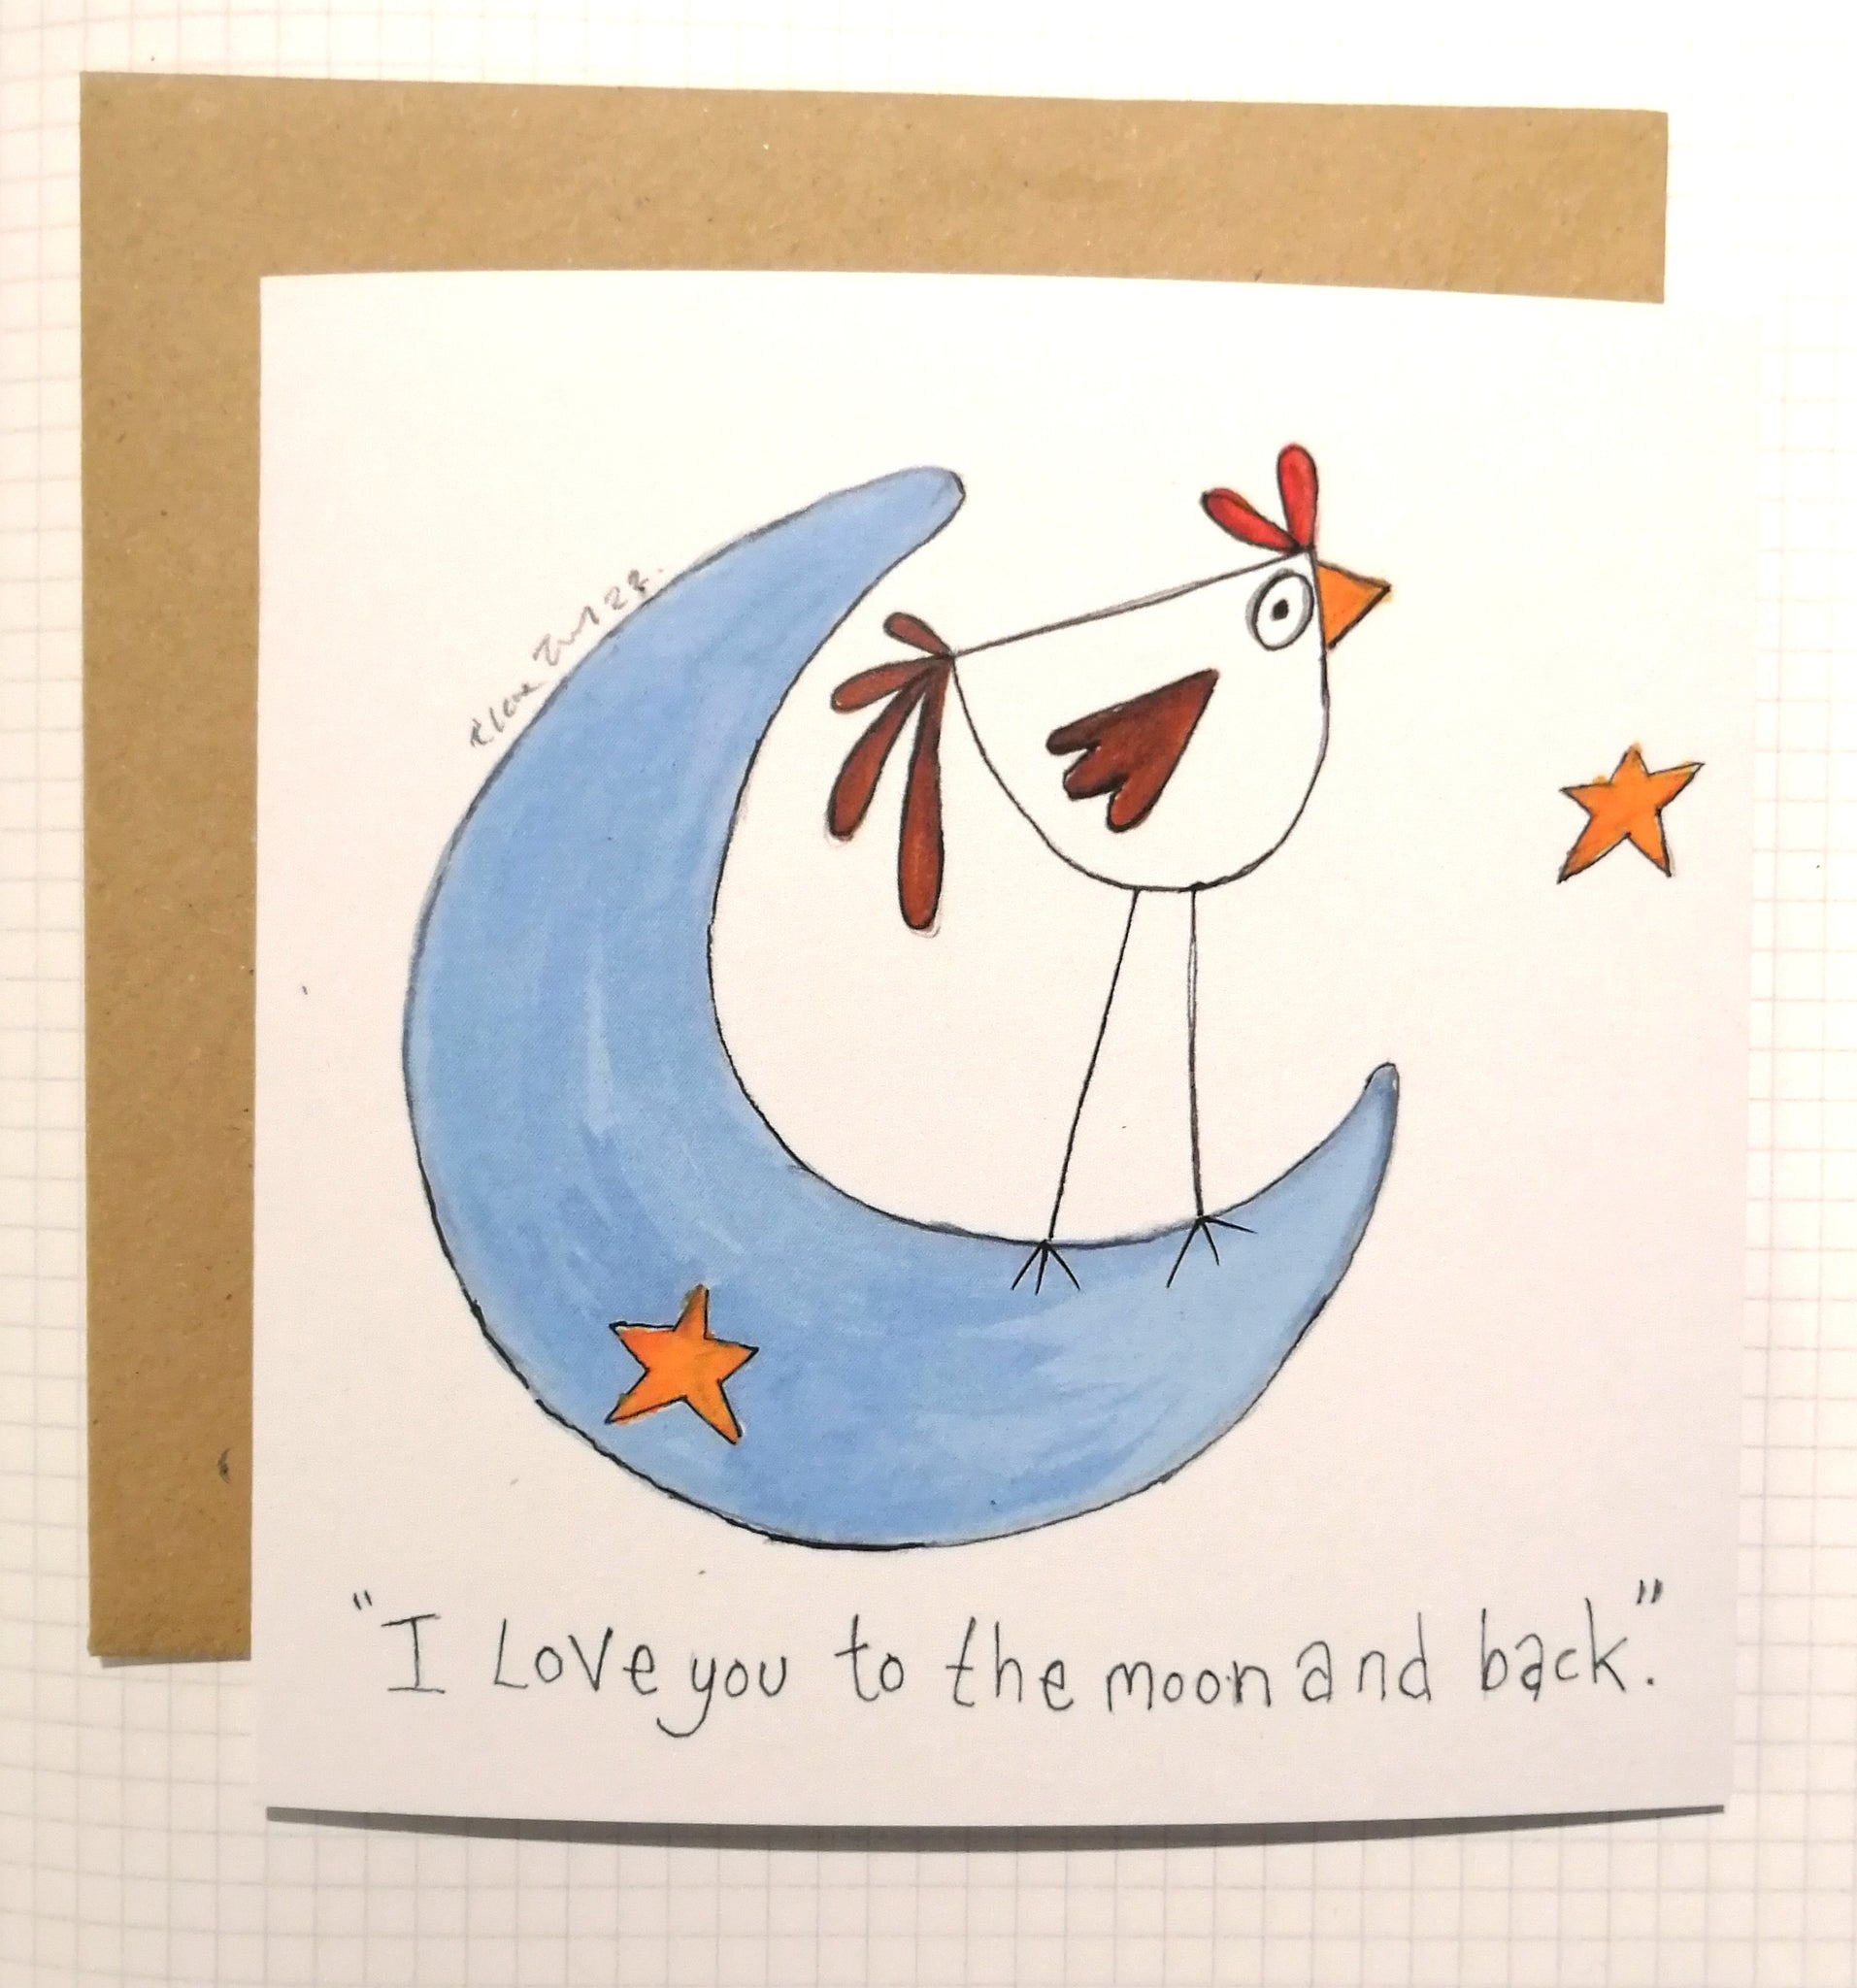 I love you to the moon and back. Greetings card.